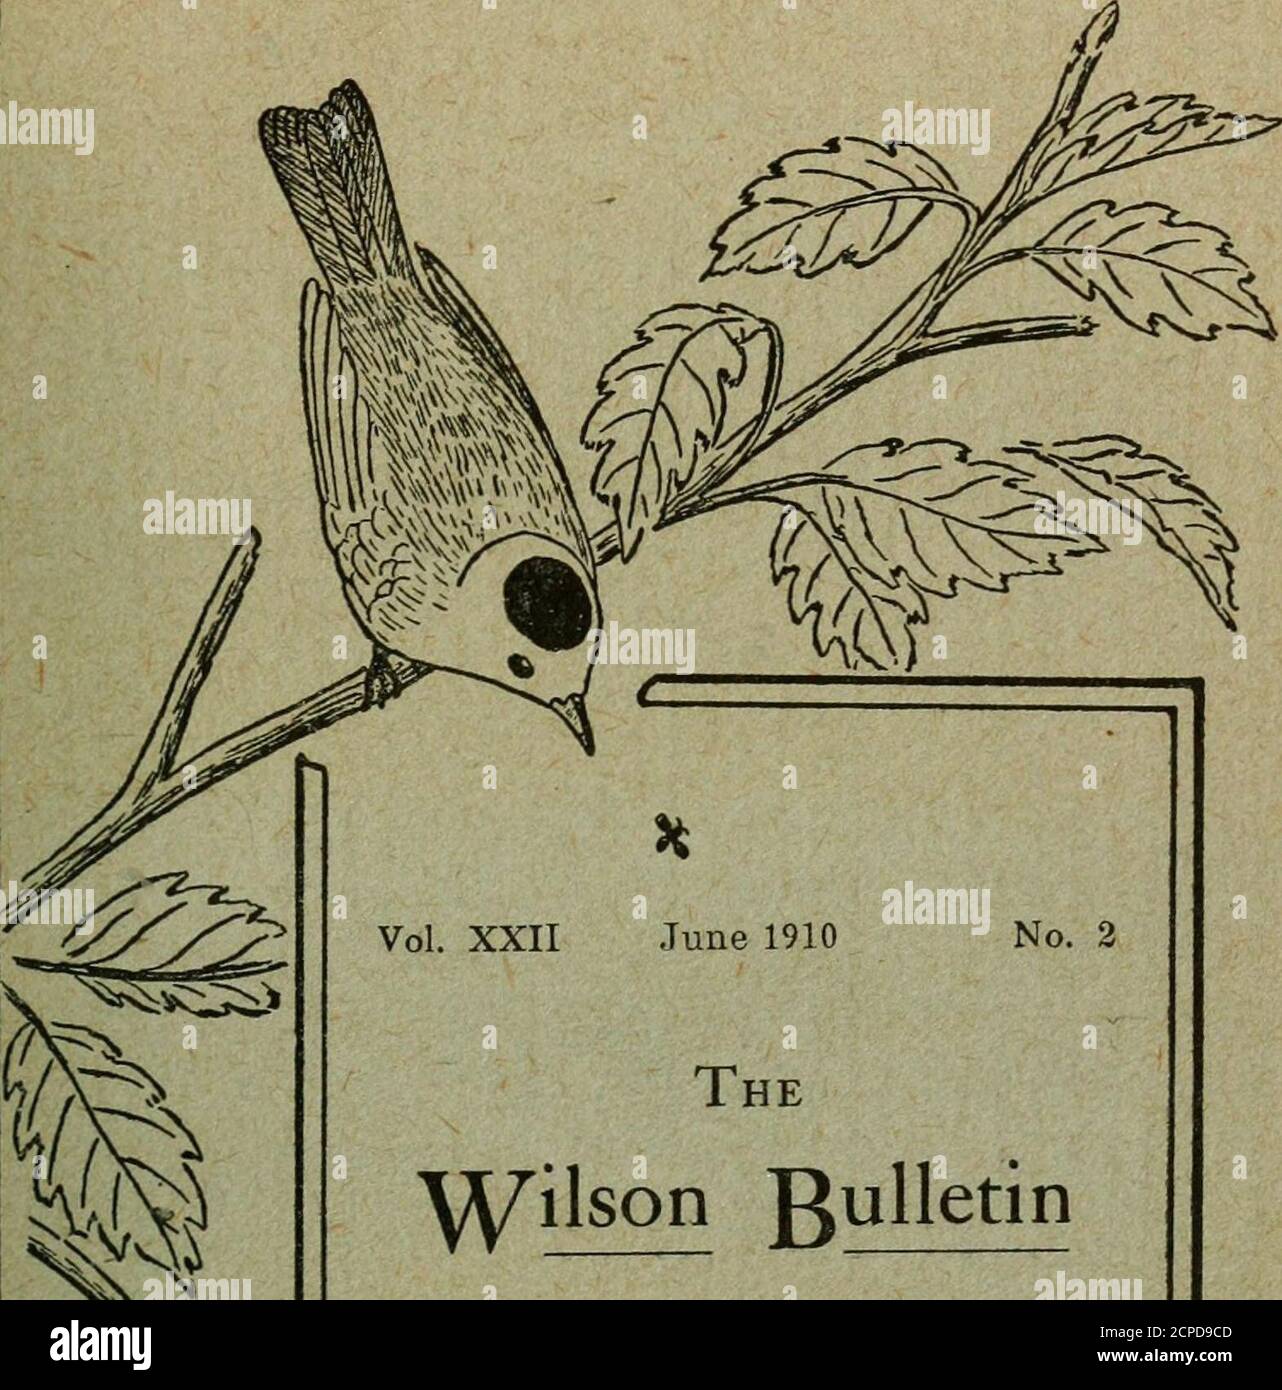 . The Wilson bulletin . March, June, September and December, bythe Wilson Ornithological Club at Oberlin, Ohio, edited by LyndsJones. Subscription: One Dollar a year, including postage, strictly in ad-vance. Single numbers, 30 cents, unless they are Special numbers,when a special price is fixed. The Bulletin, including all Specialnumbers, is free to all paid up members, either Active, Associate, orHonorary, after their election. Subscriptions may be addressed to the editor, or to Mr. Frank L.Bums, Berwyn, Pa. Advertisements should be addressed to The Wilson Bulletin,Oberlin, Ohio. Terms will b Stock Photo